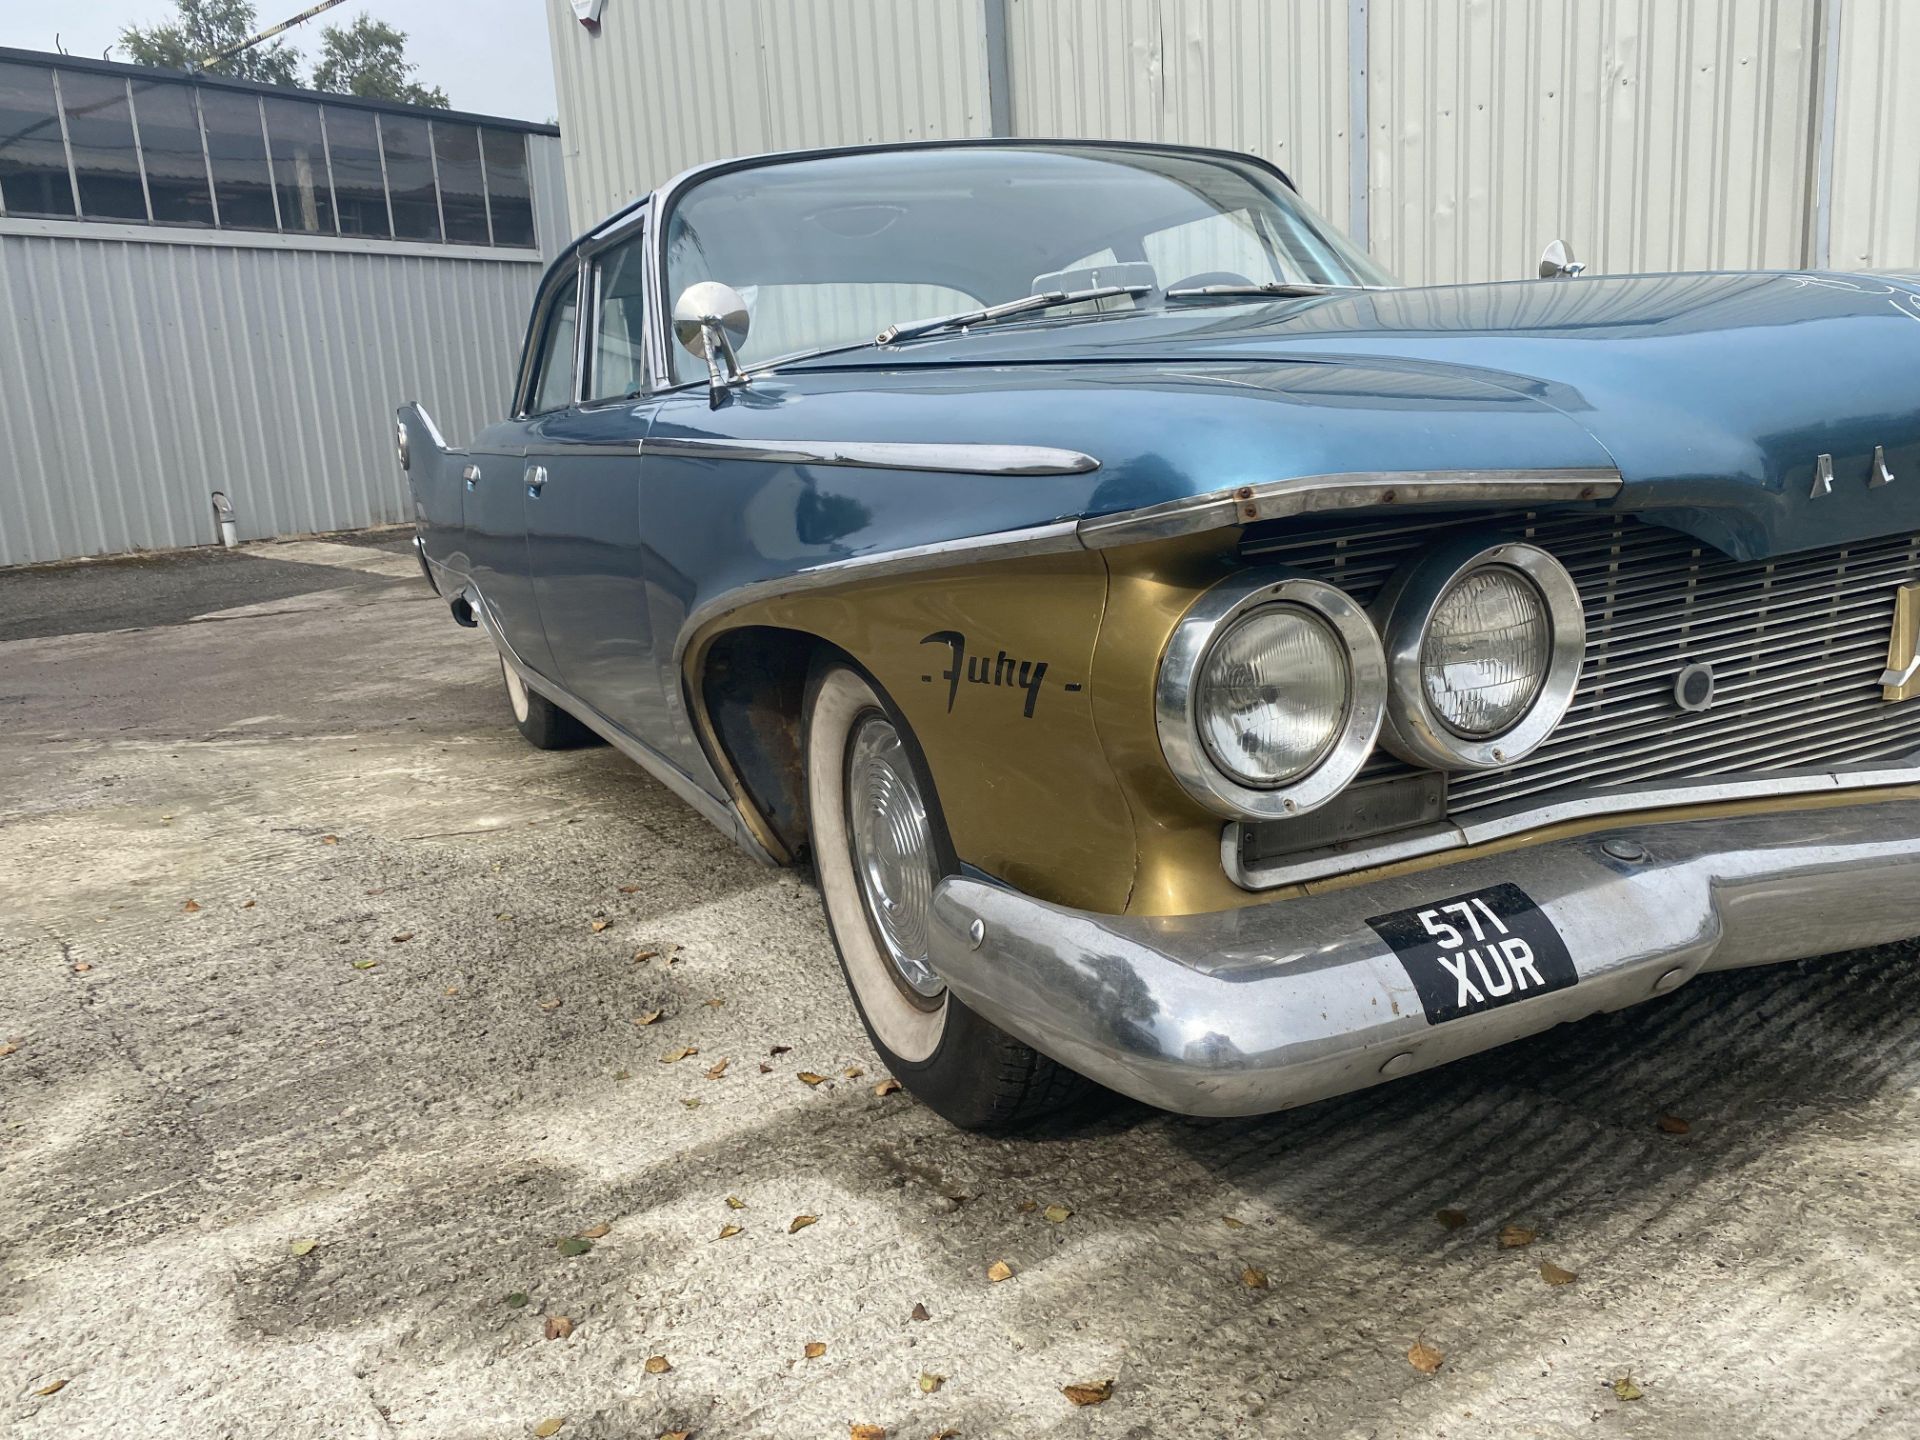 Plymouth Fury - Image 19 of 41